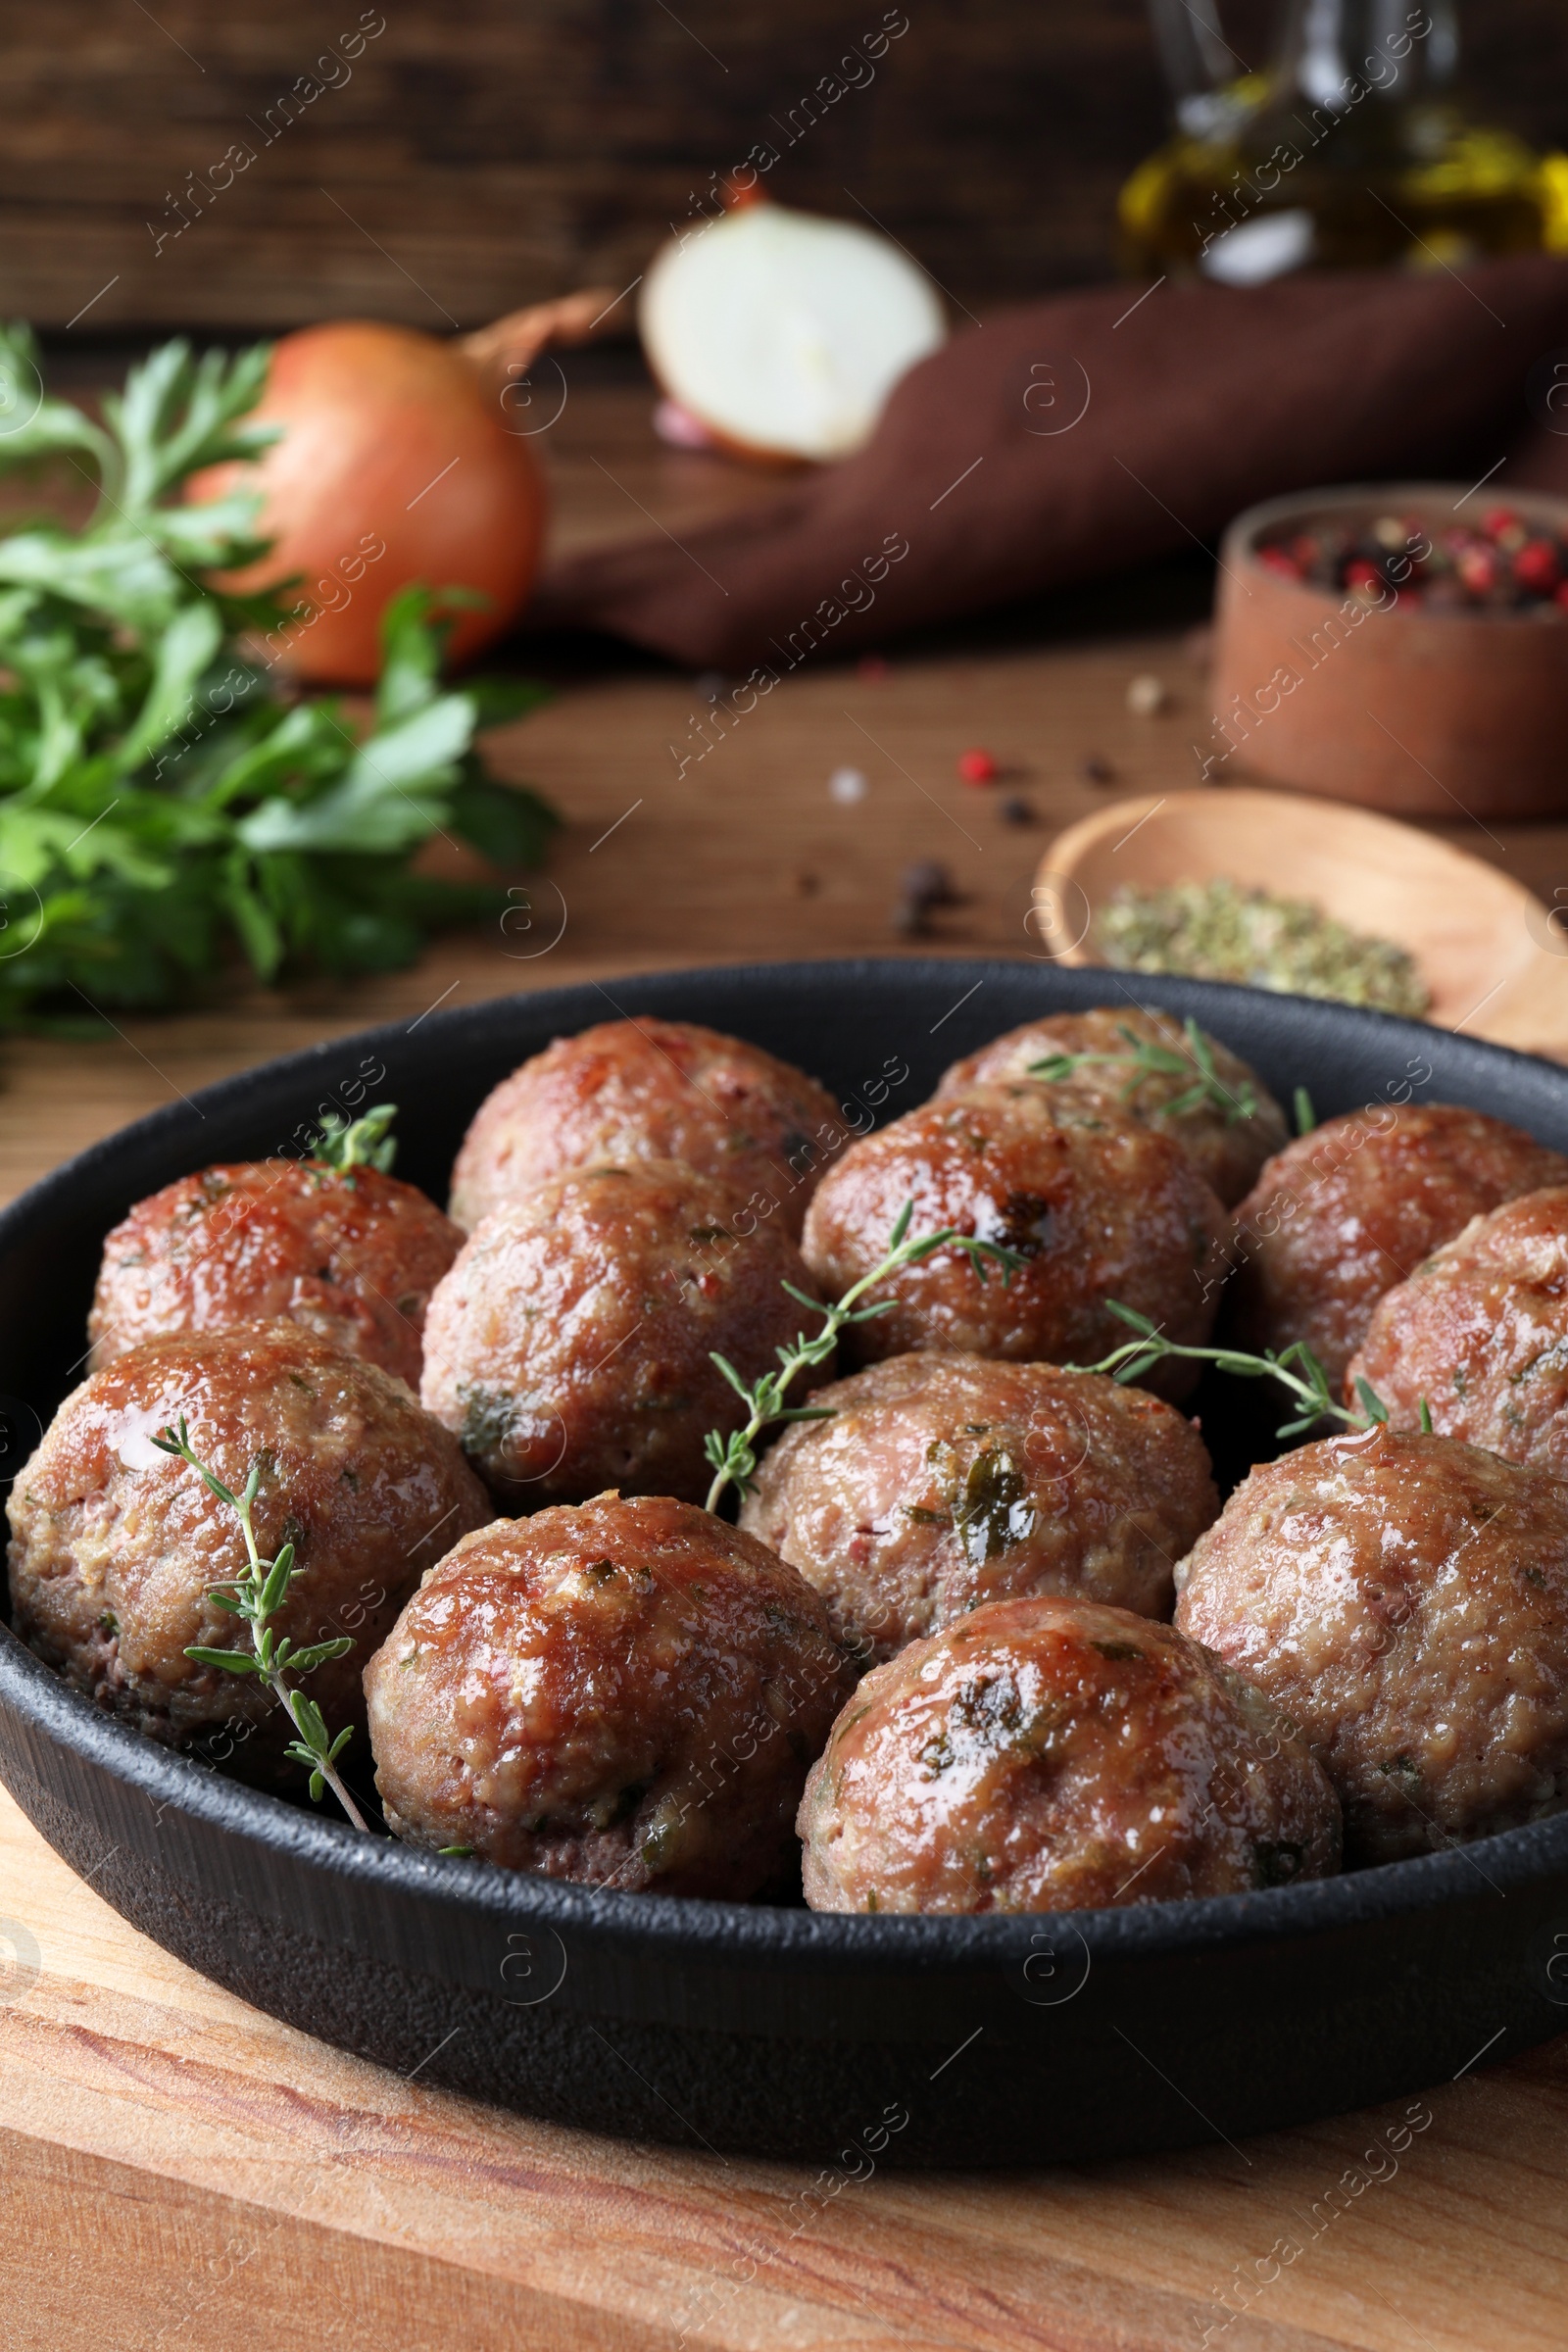 Photo of Tasty cooked meatballs served on wooden board